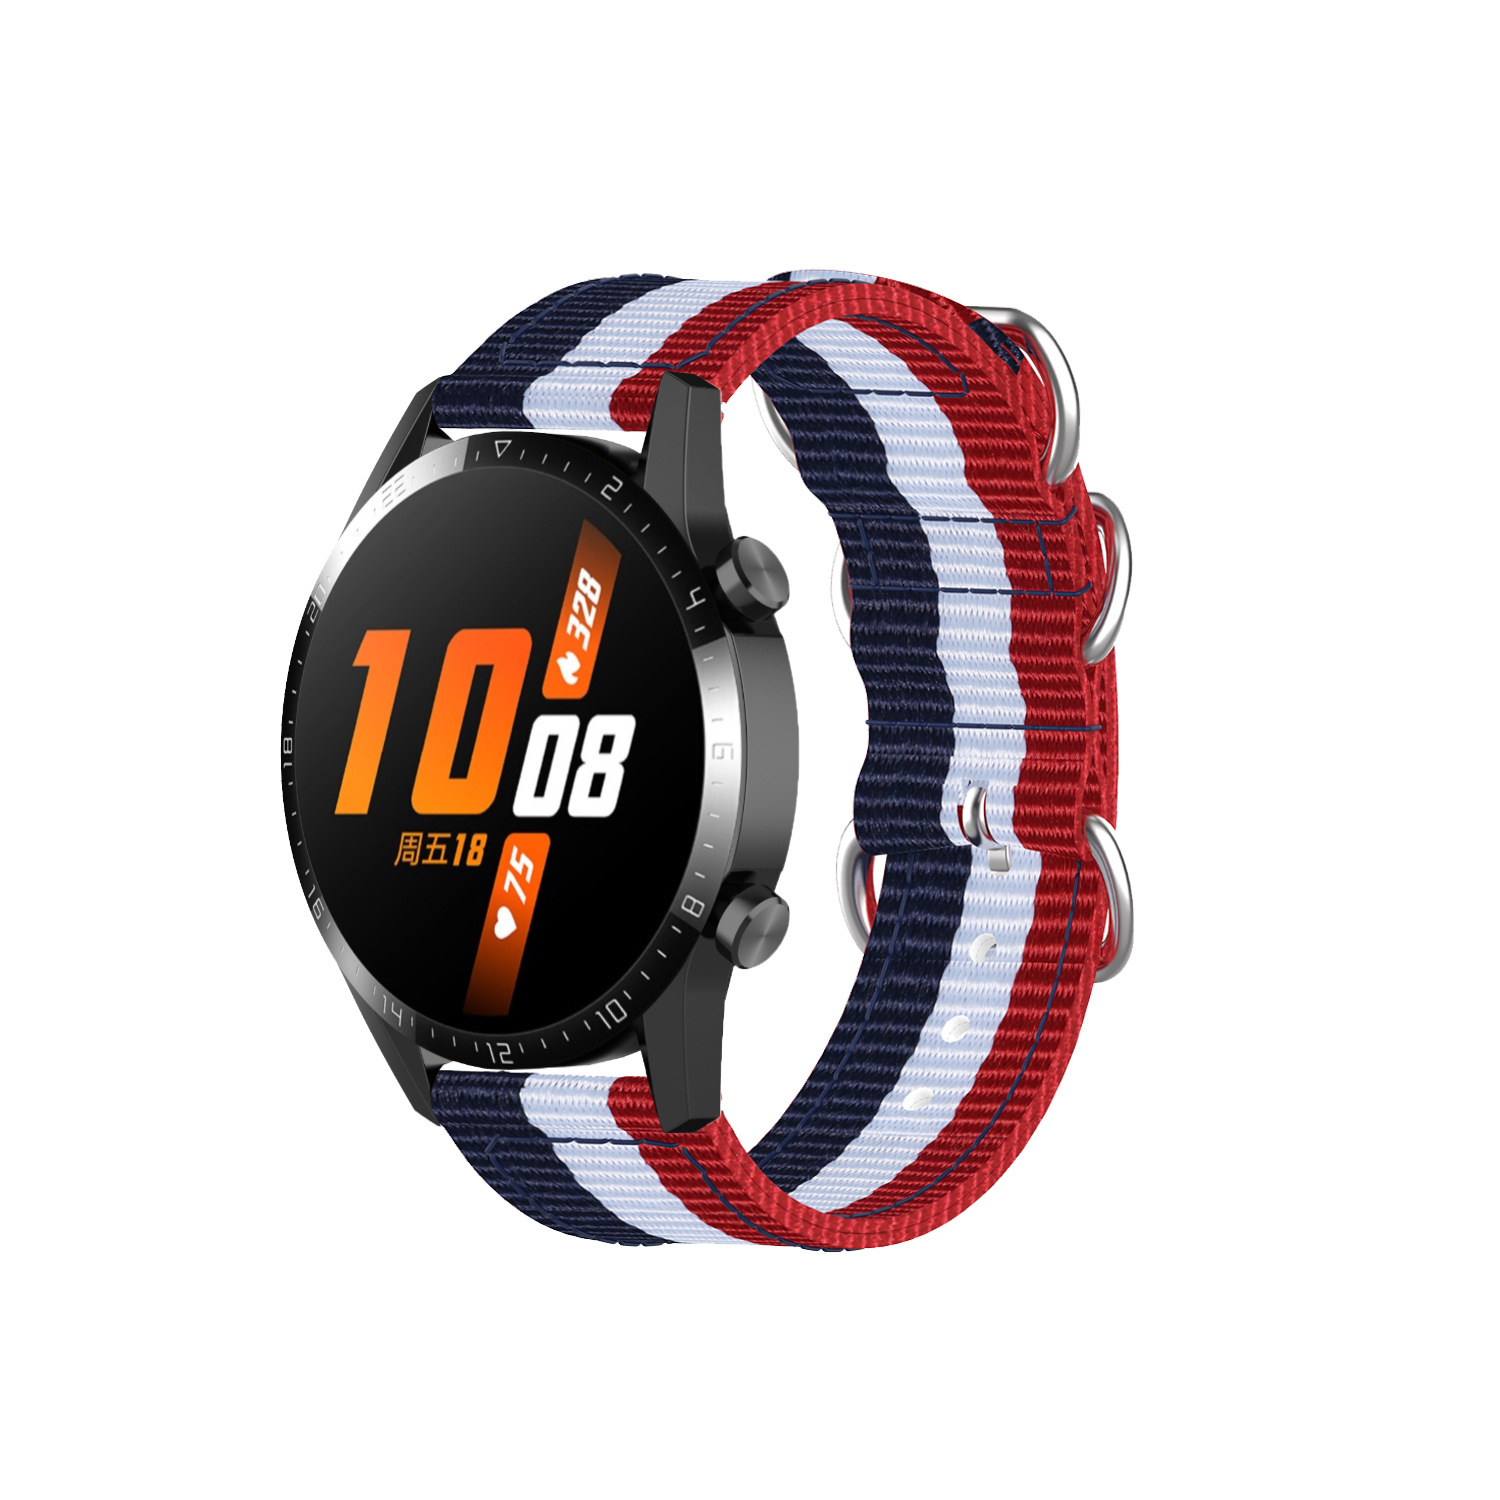 Bakeey-2022mm-Width-Breathable-Sweatproof-Nylon-Canvas-Watch-Band-Strap-Replacement-for-Huawei-Watch-1926643-15